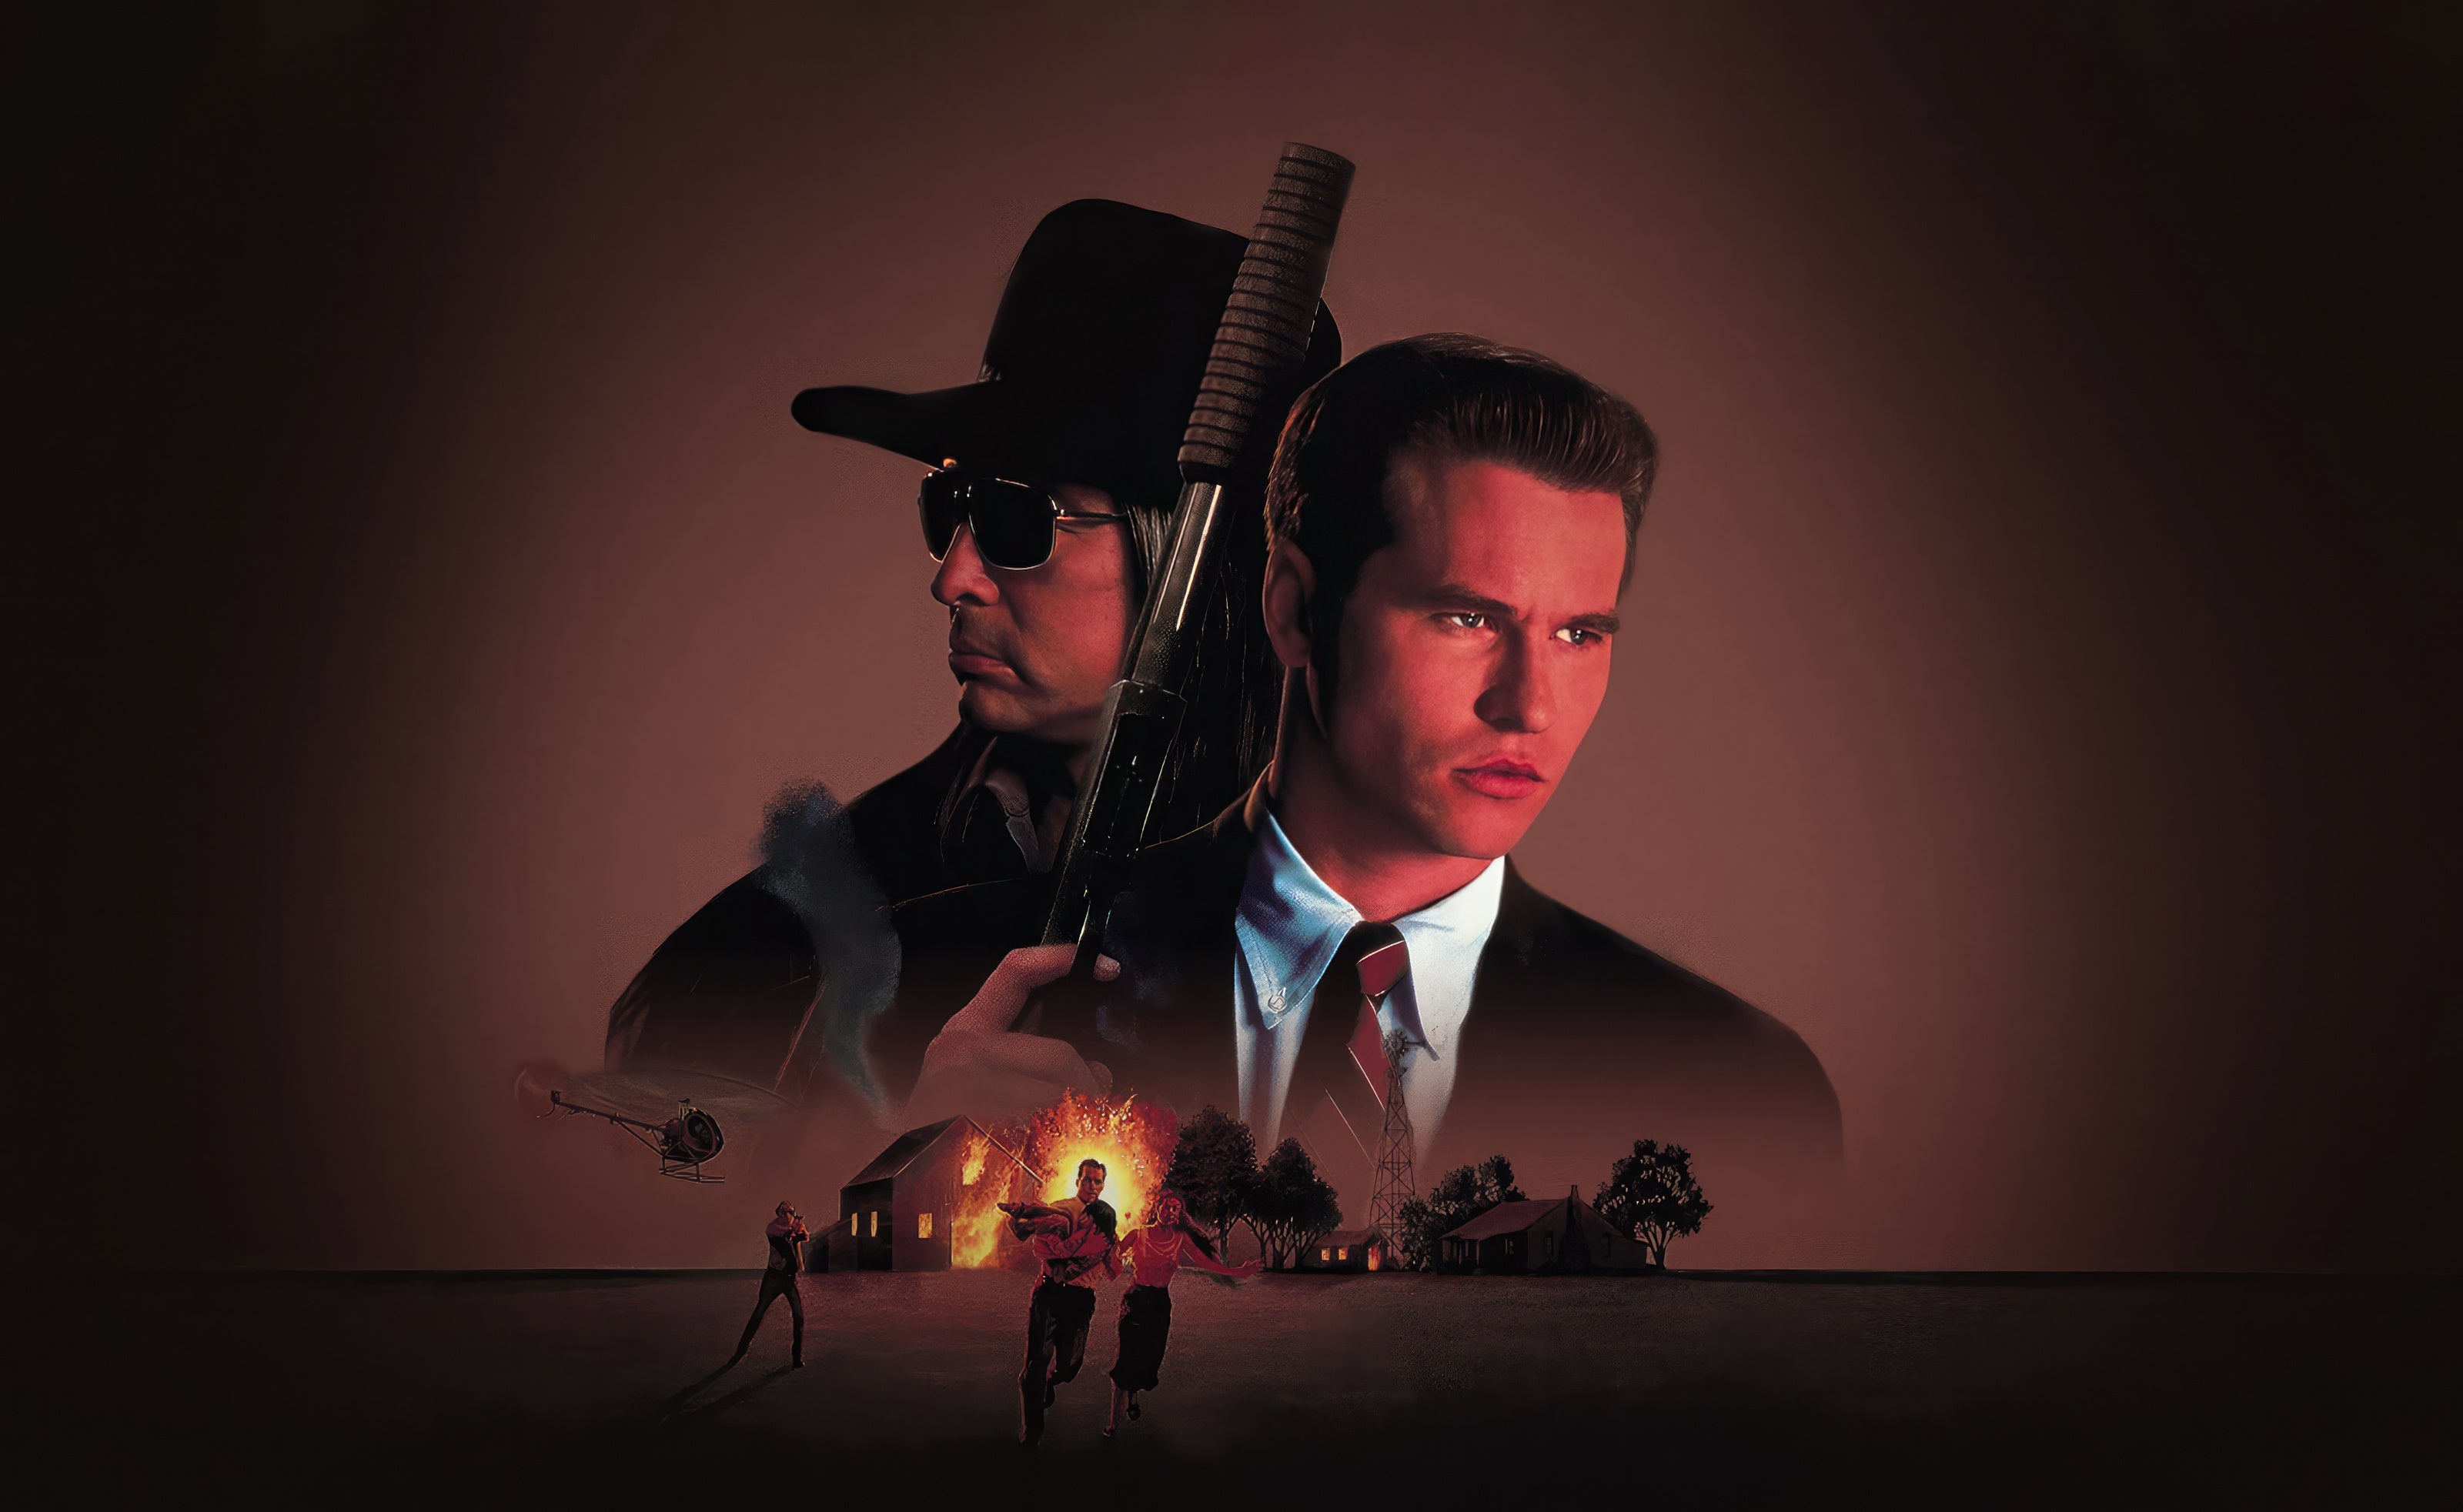 Thunderheart Script Screenplay - Image of Movie Poster